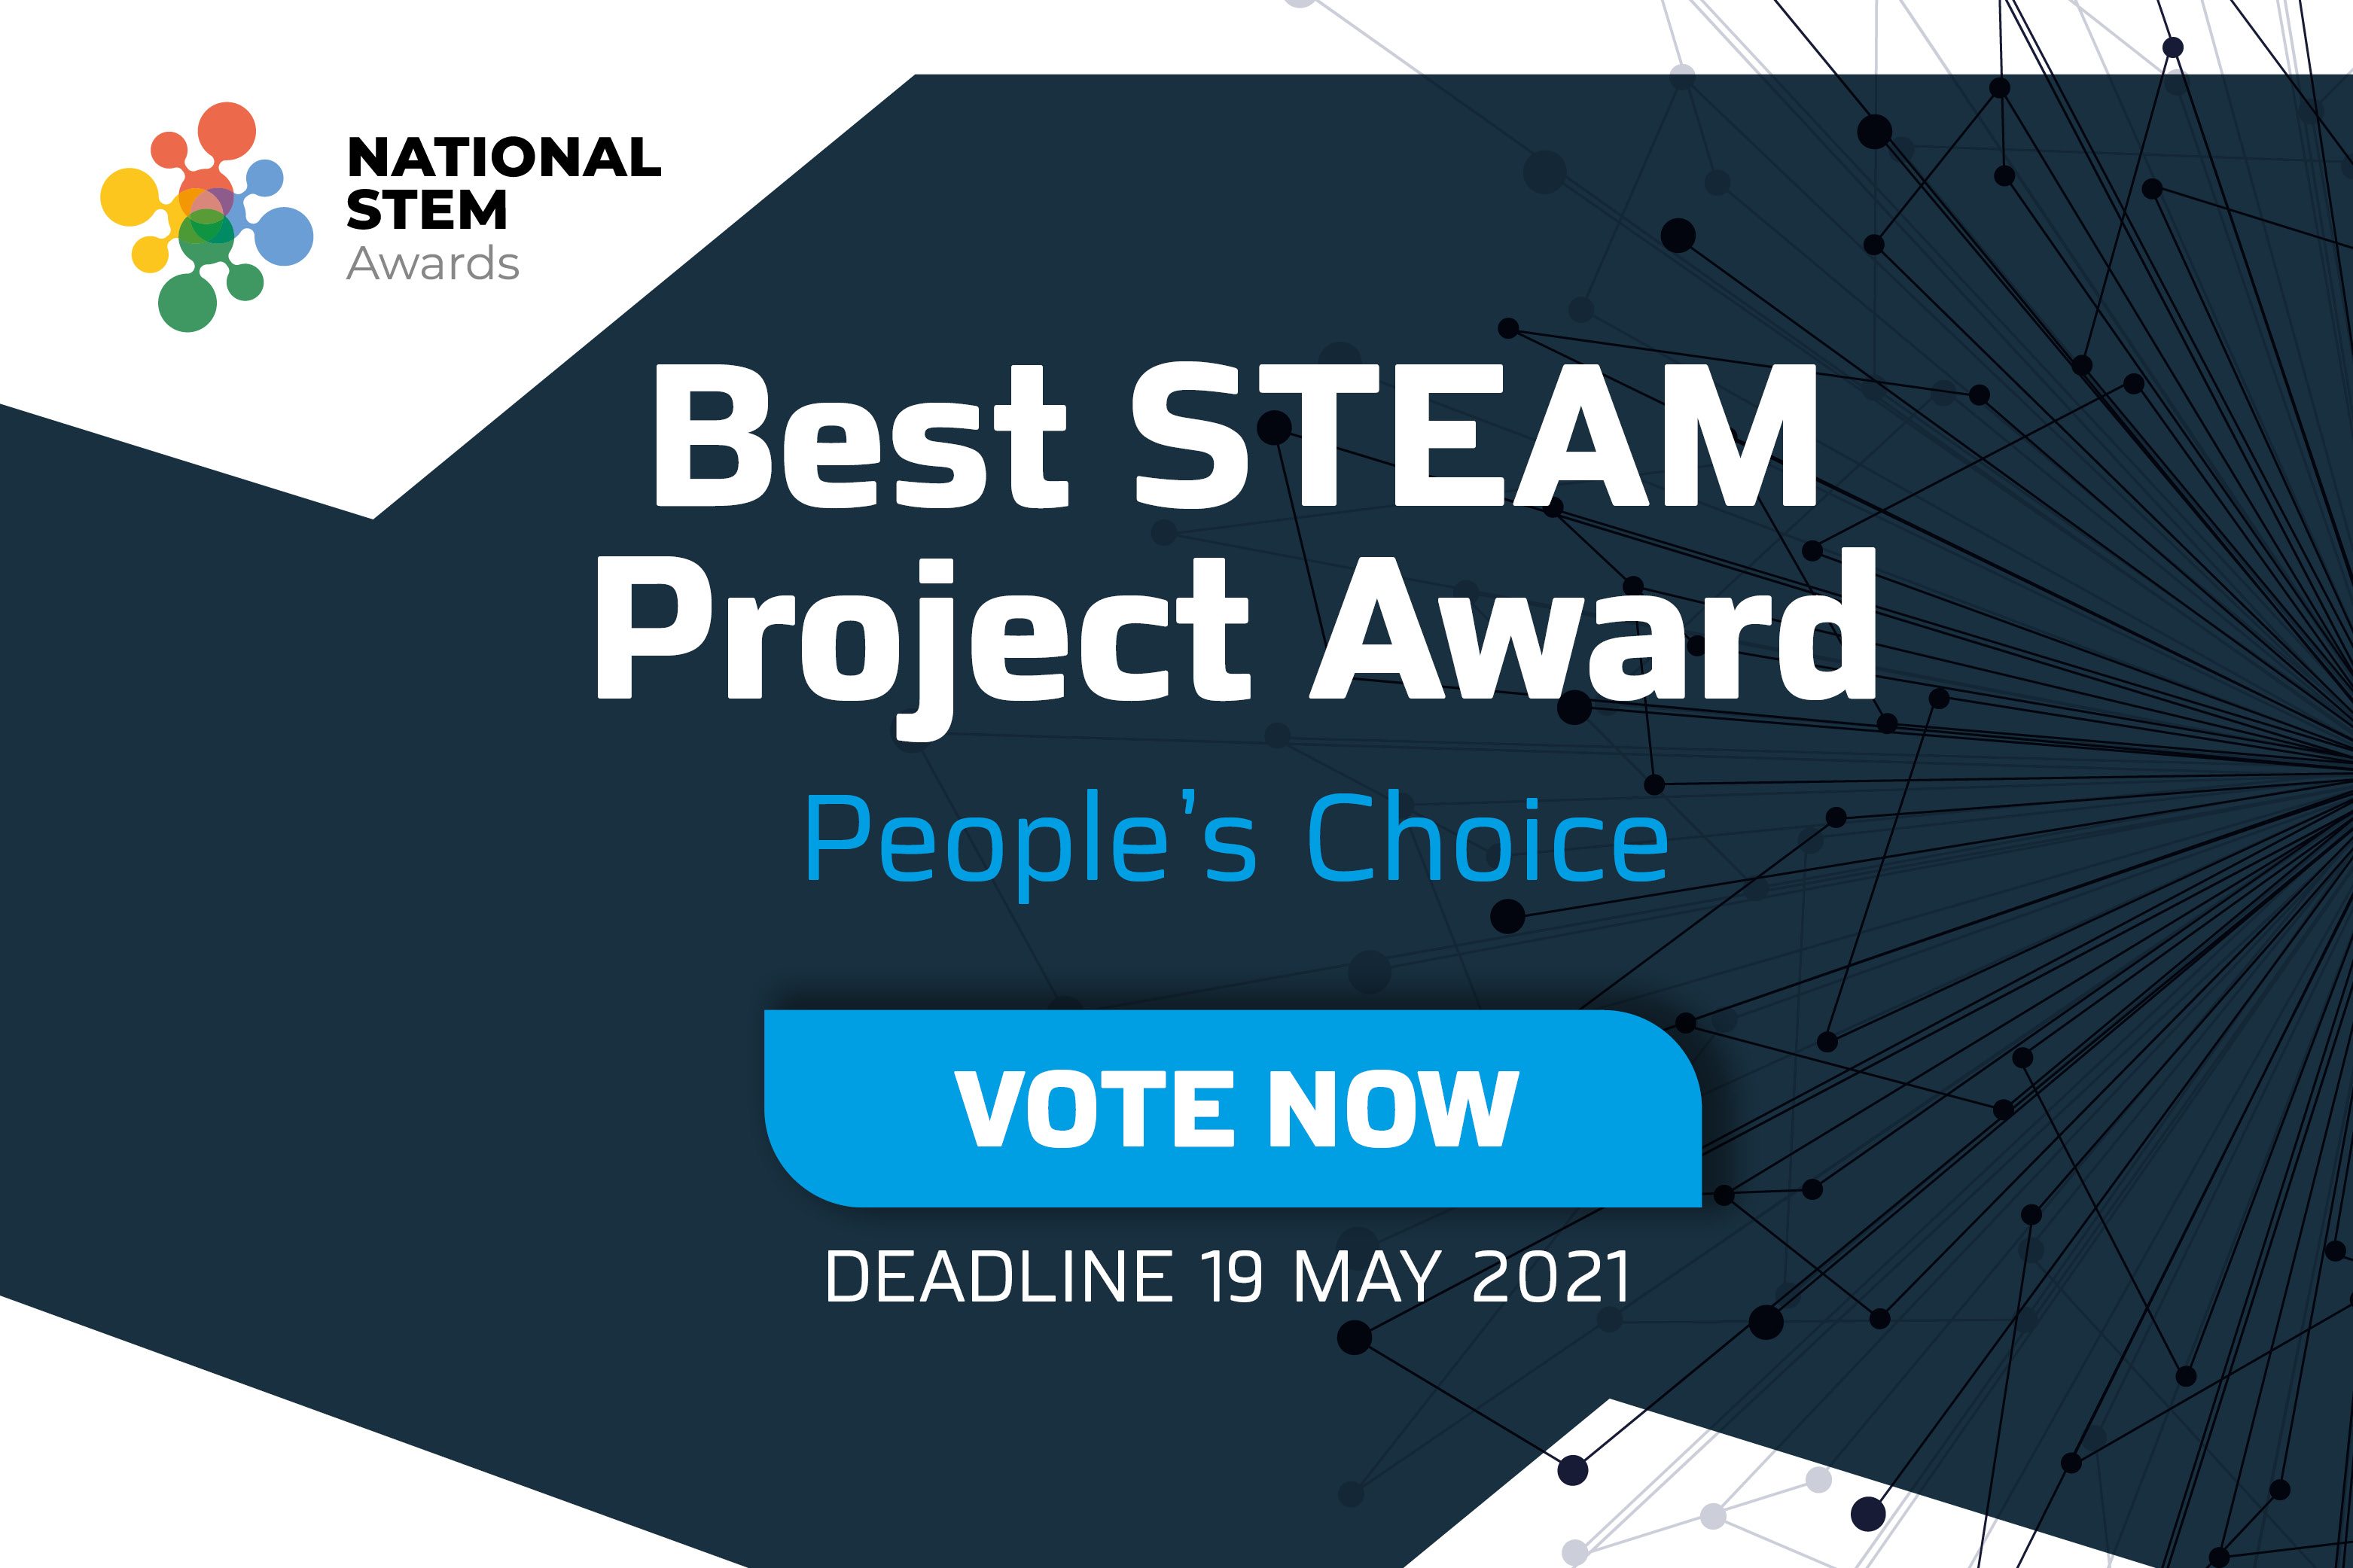 Best STEAM Project Award - People's Choice